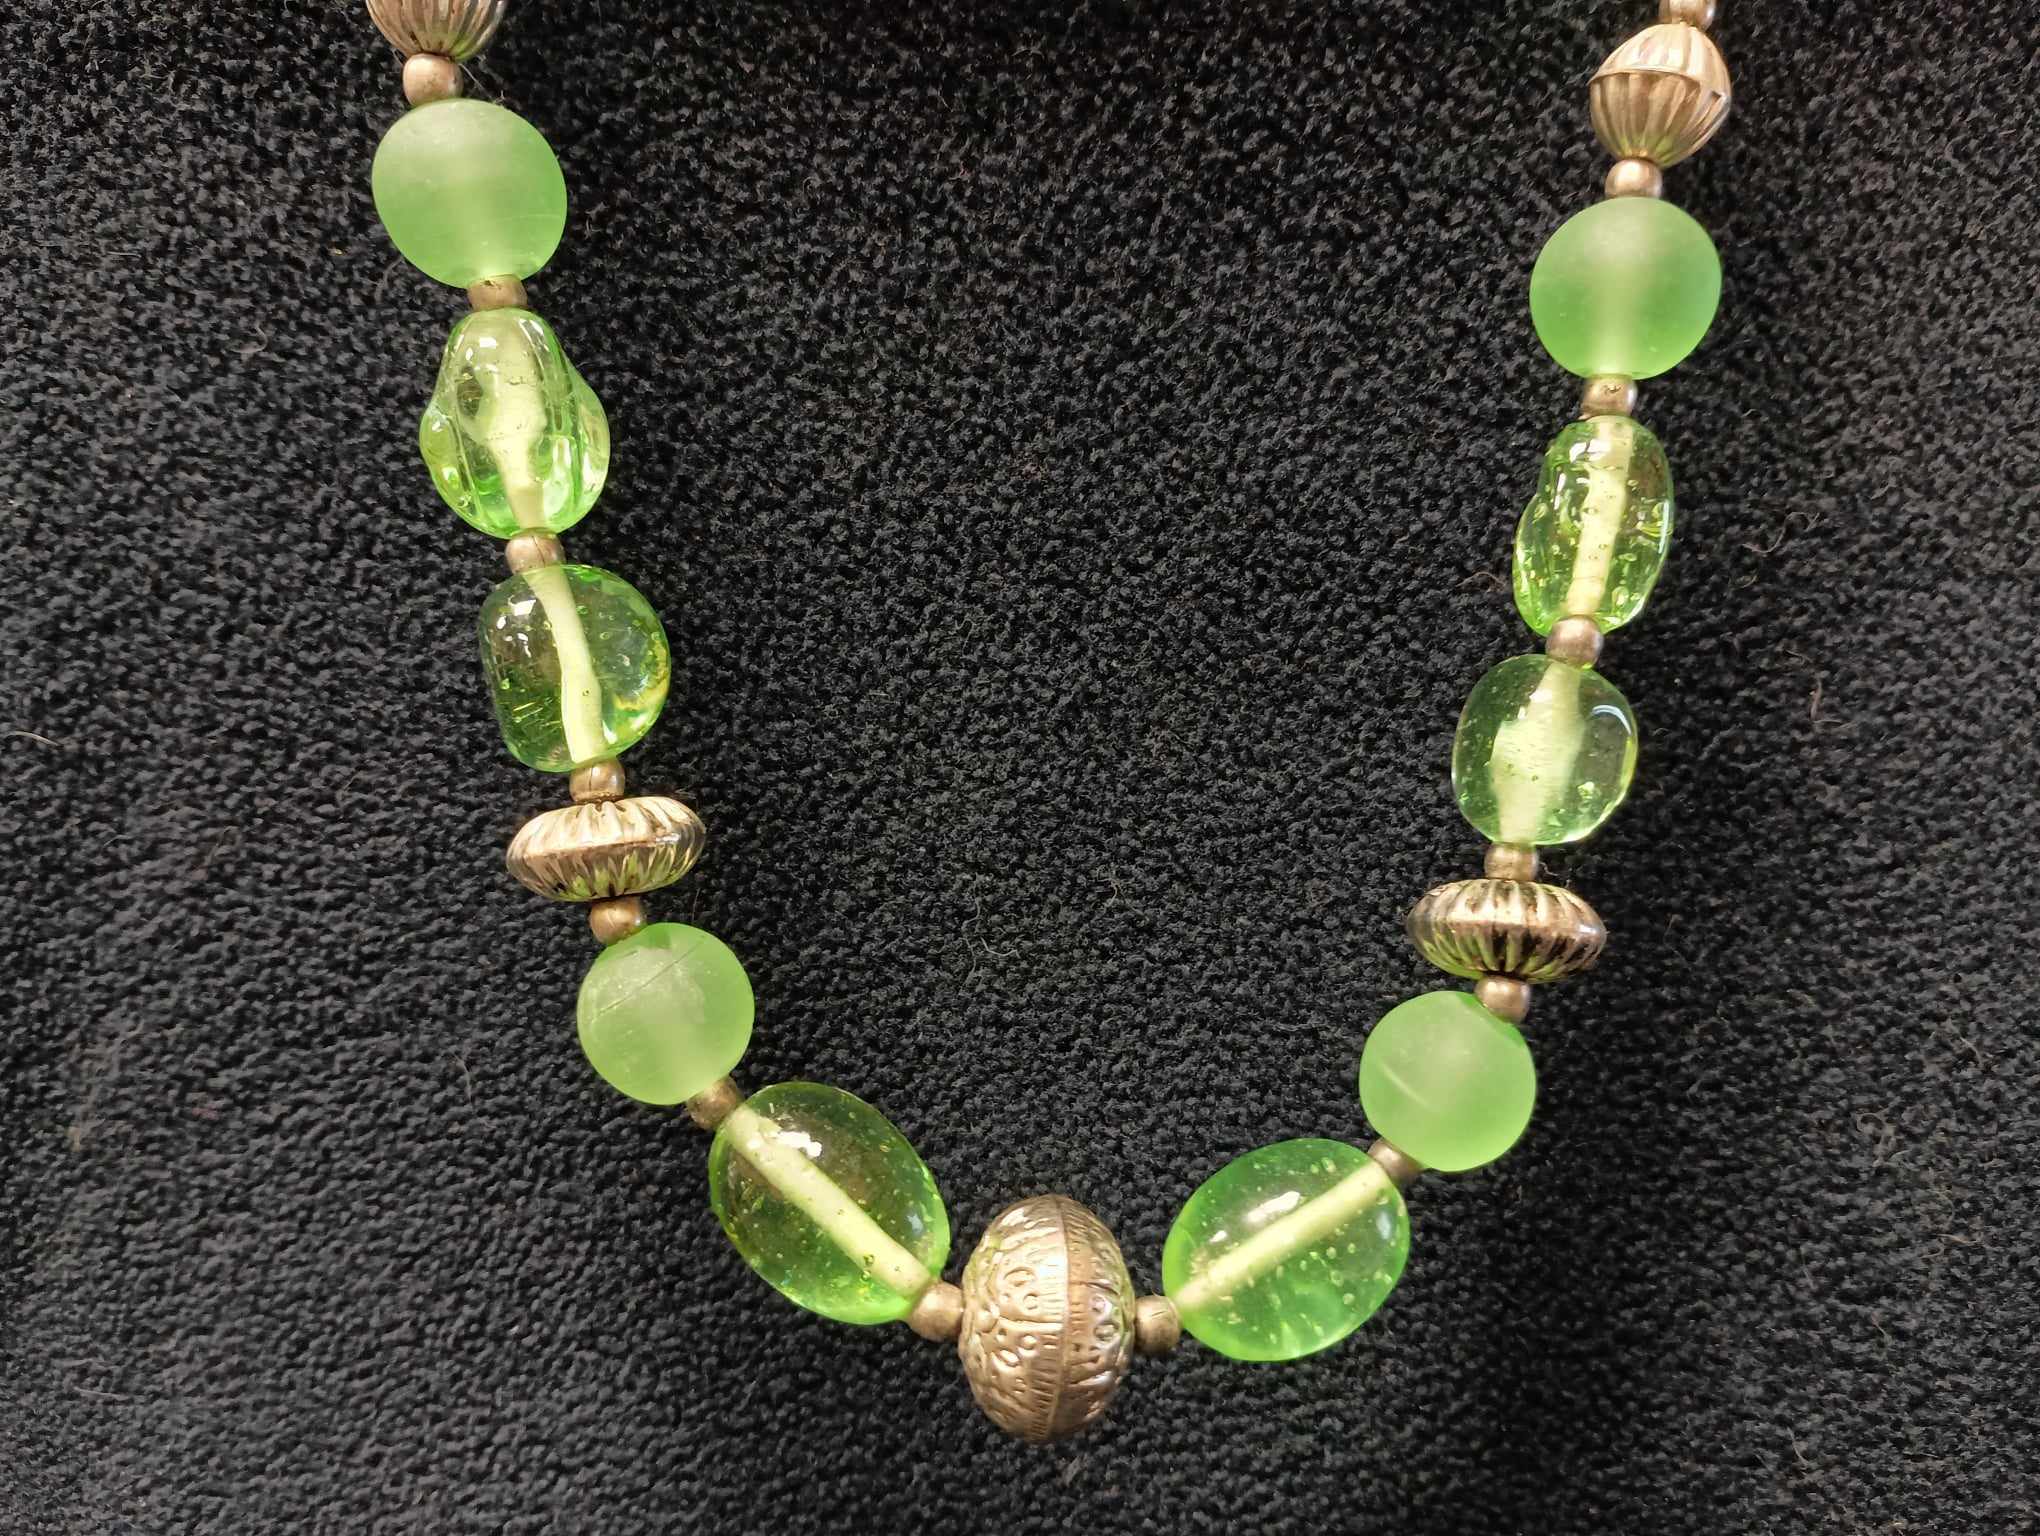 Green Glass Necklace